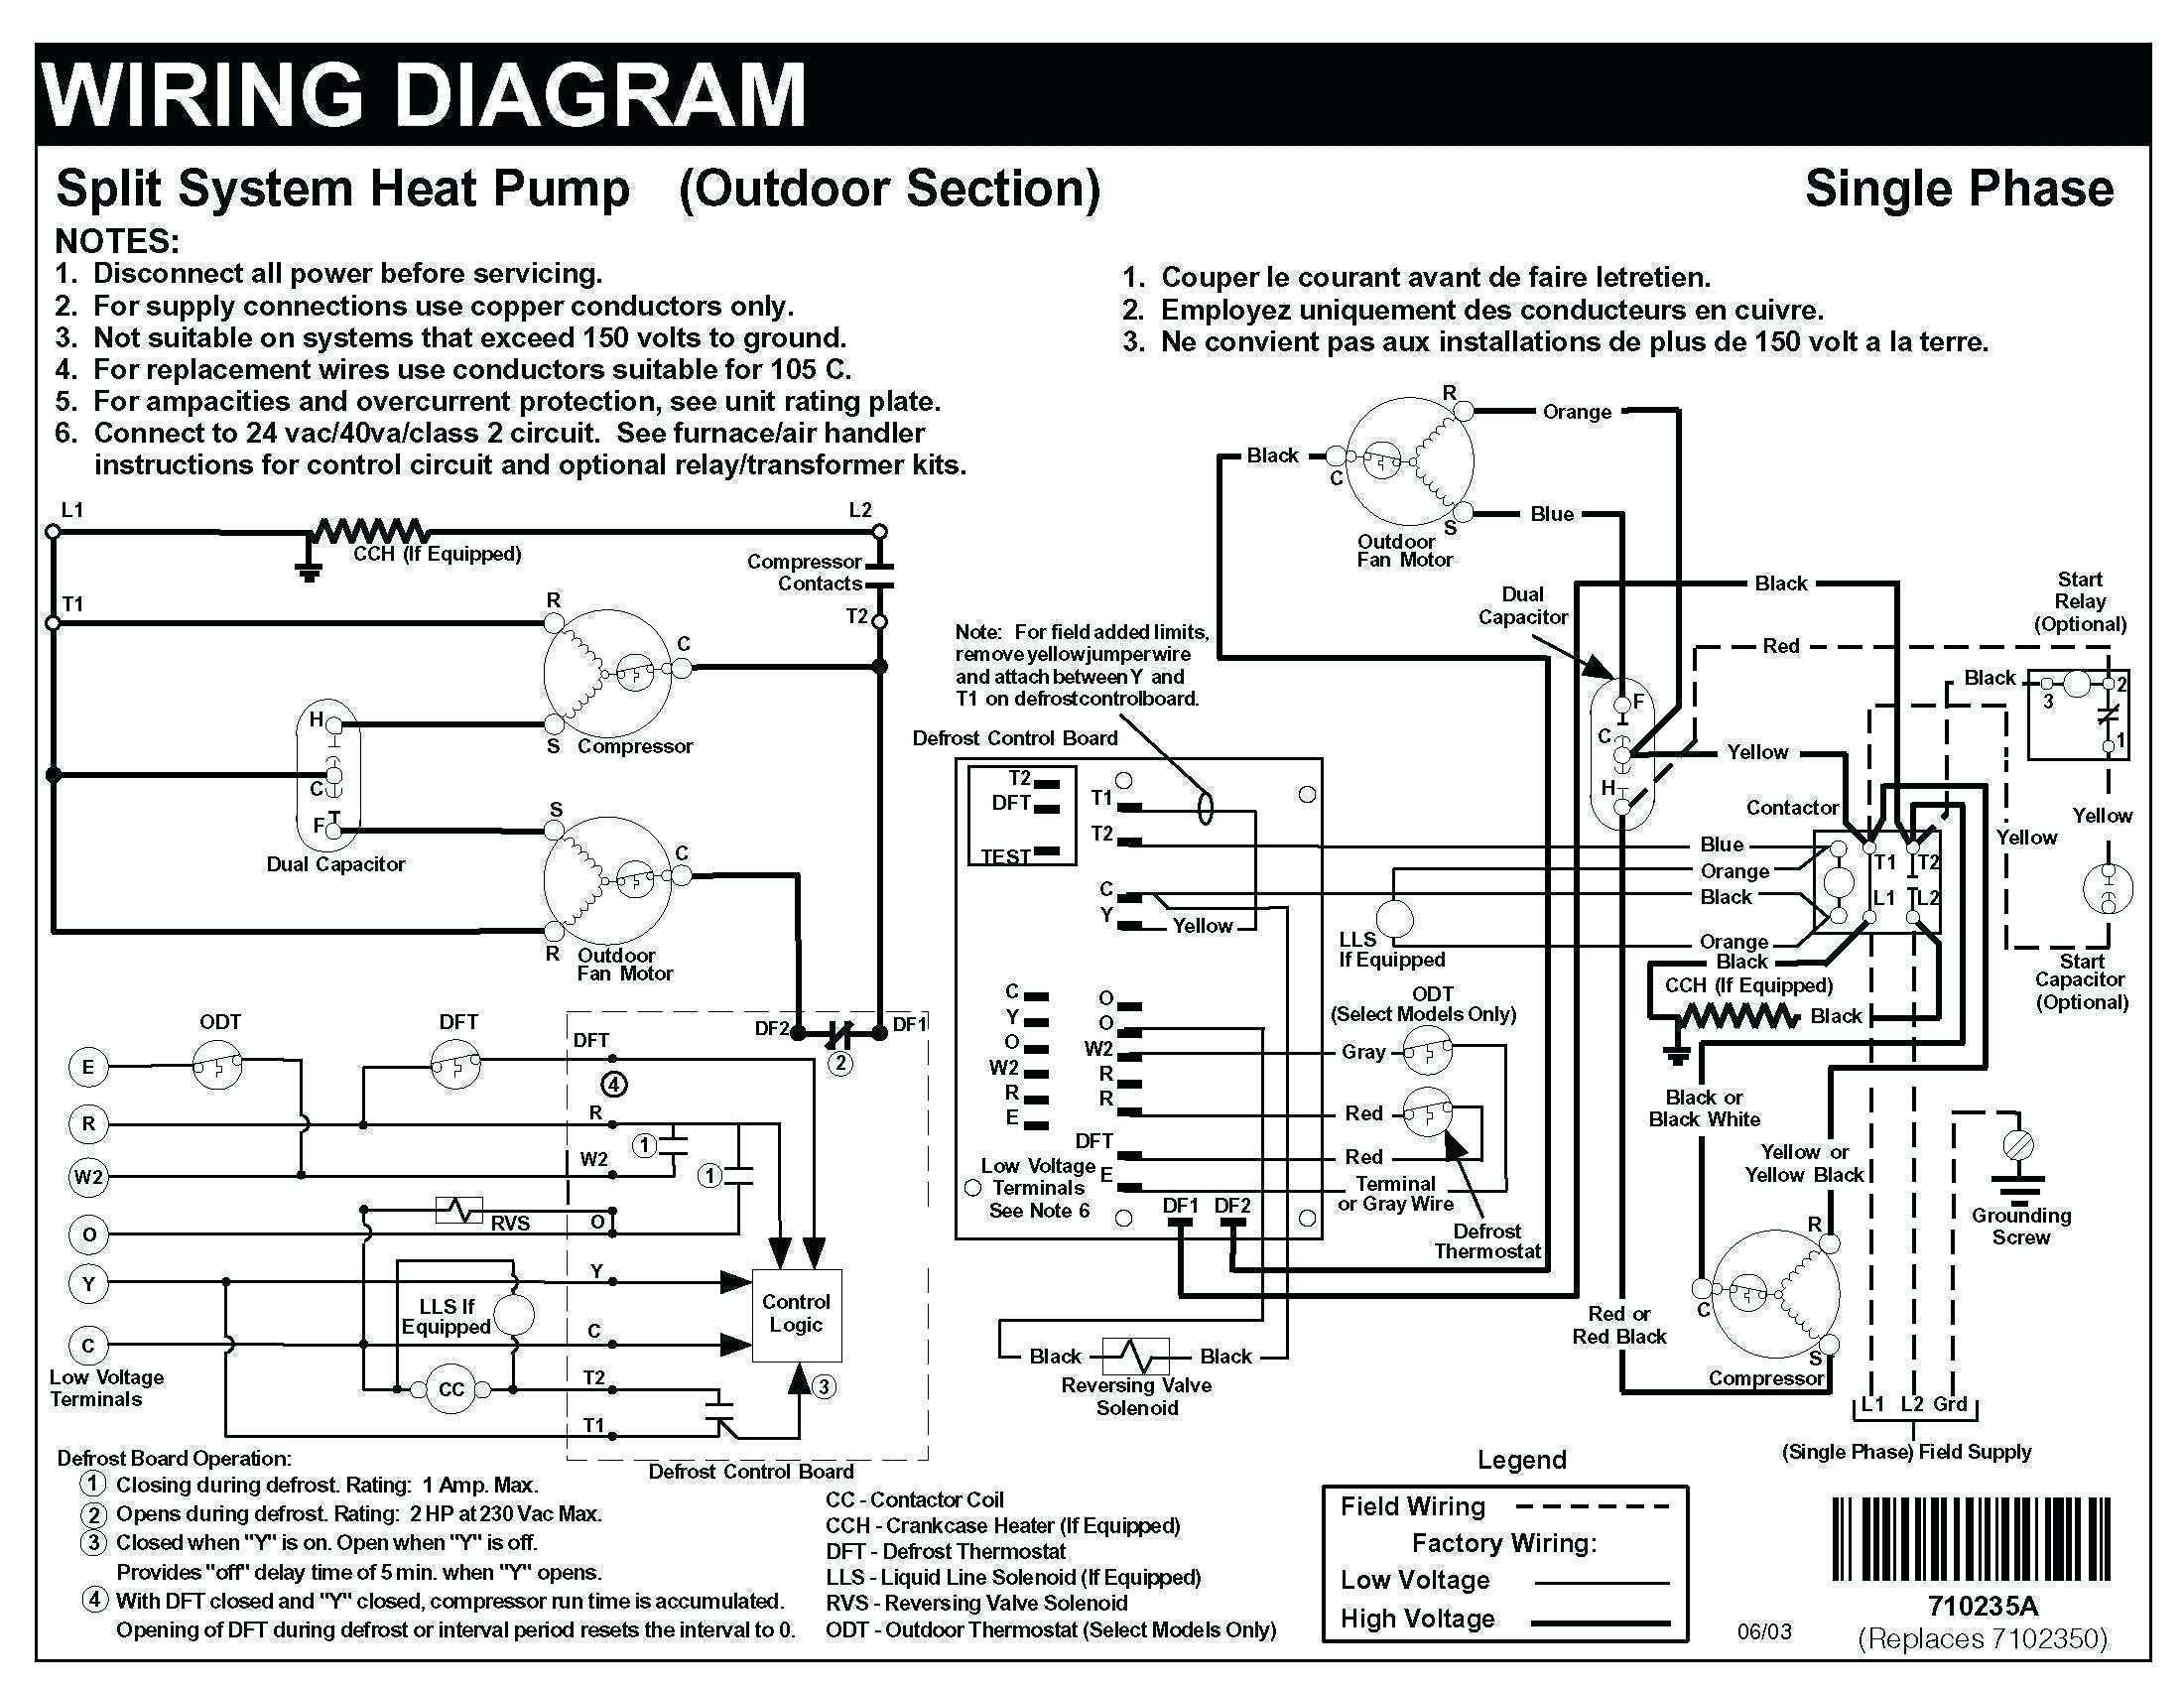 Dometic thermostat Wiring Diagram S Plan Wiring Diagram with Frost Stat Fresh Honeywell Pipe Of Dometic thermostat Wiring Diagram